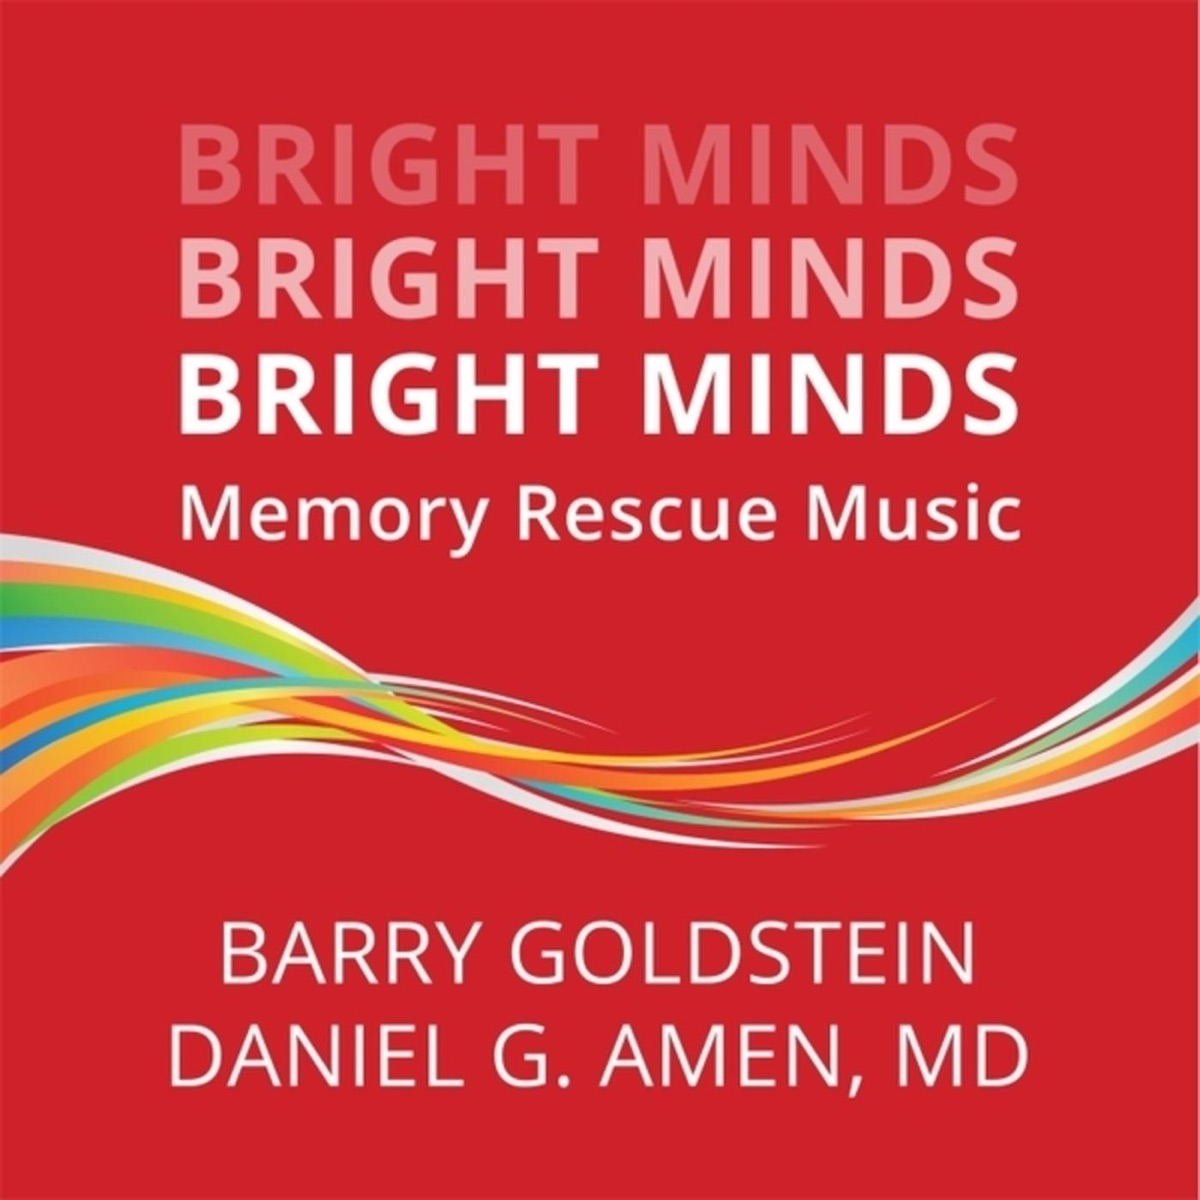 Bright Minds: Memory Rescue Music by Barry Goldstein & Daniel G. Amen, M.D.  on Apple Music